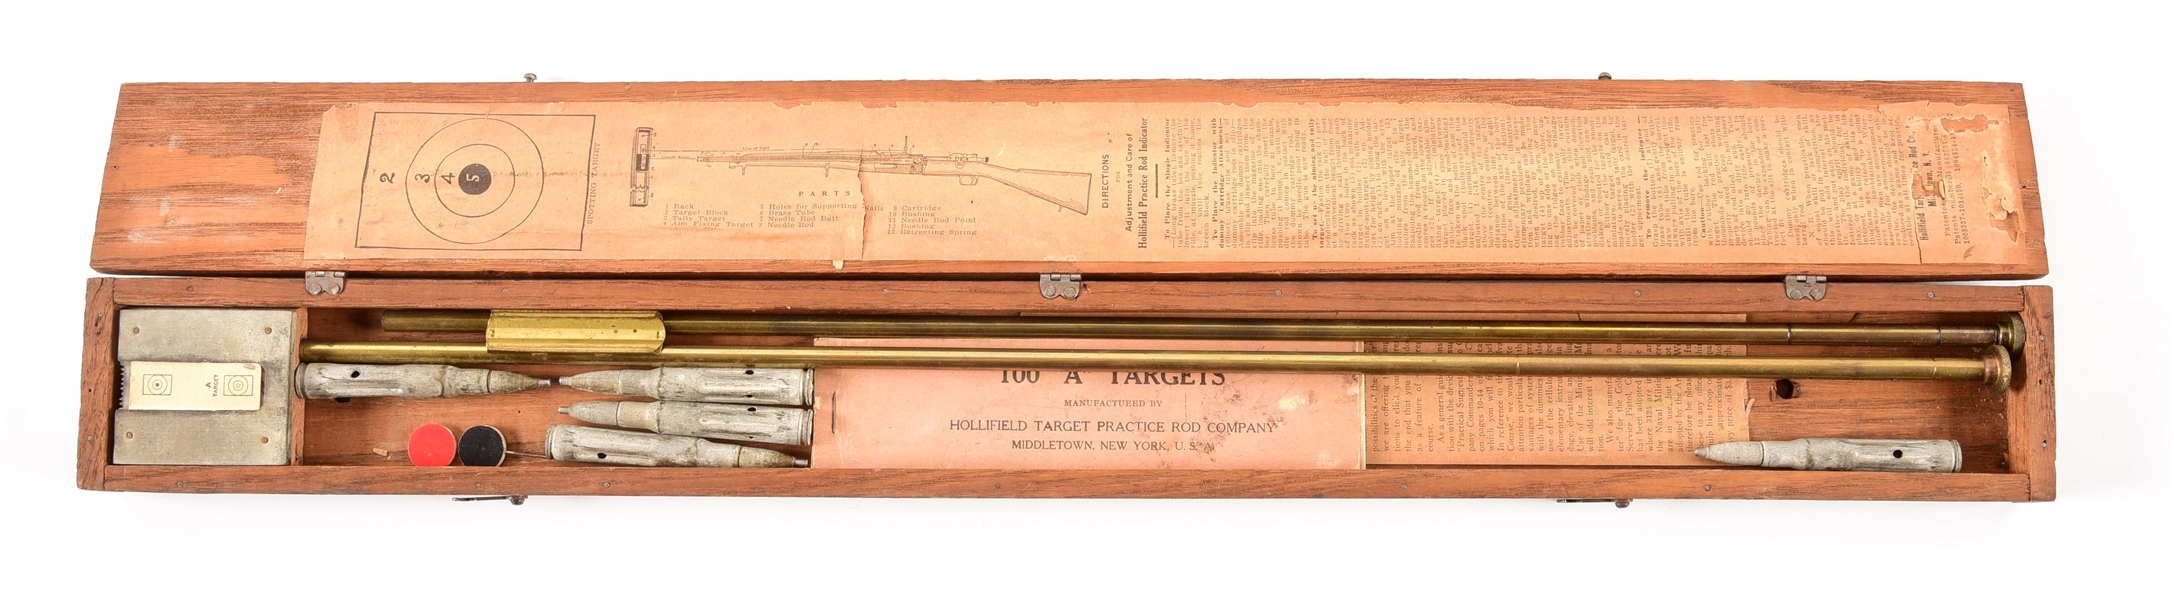 CASED HOLLIFIELD "DOTTER" PRACTICE KIT FOR SPRINGFIELD M1903 RIFLES.